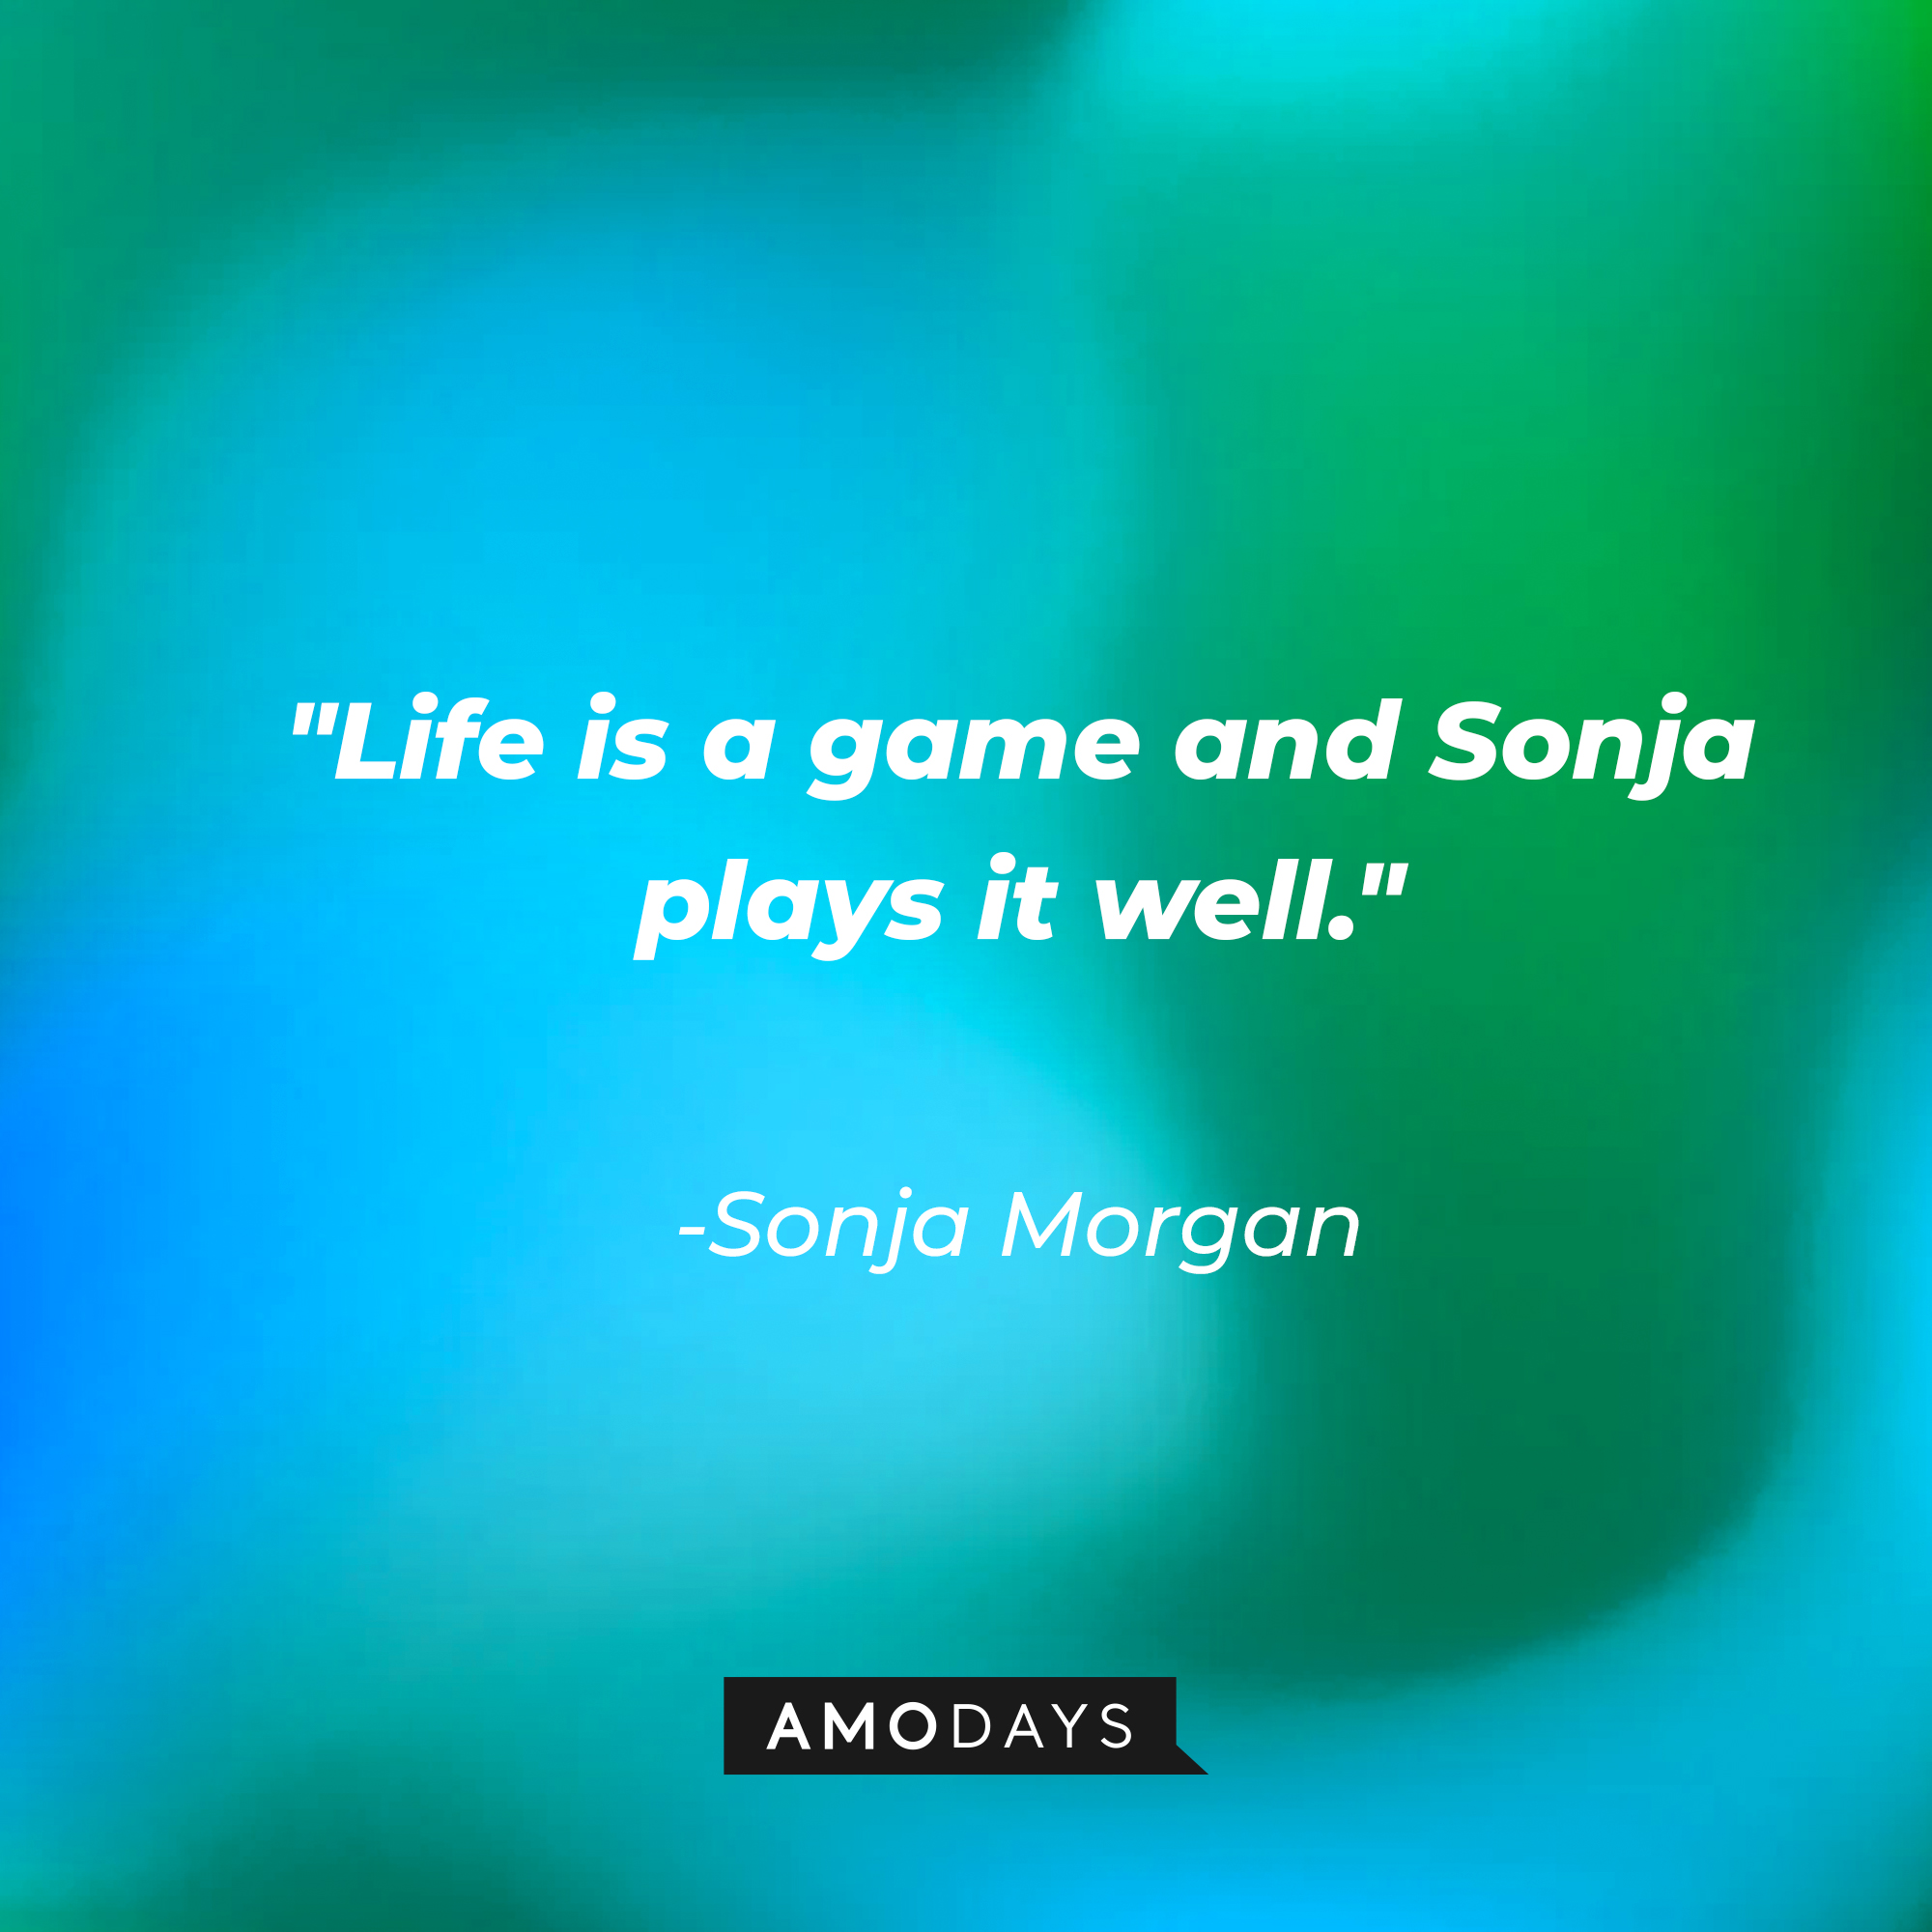 Sonja Morgan's quote: "Life is a game and Sonja plays it well." Sonja Morgan's quote: "I don't stir the pot. I stir the drink." | Source: Amodays